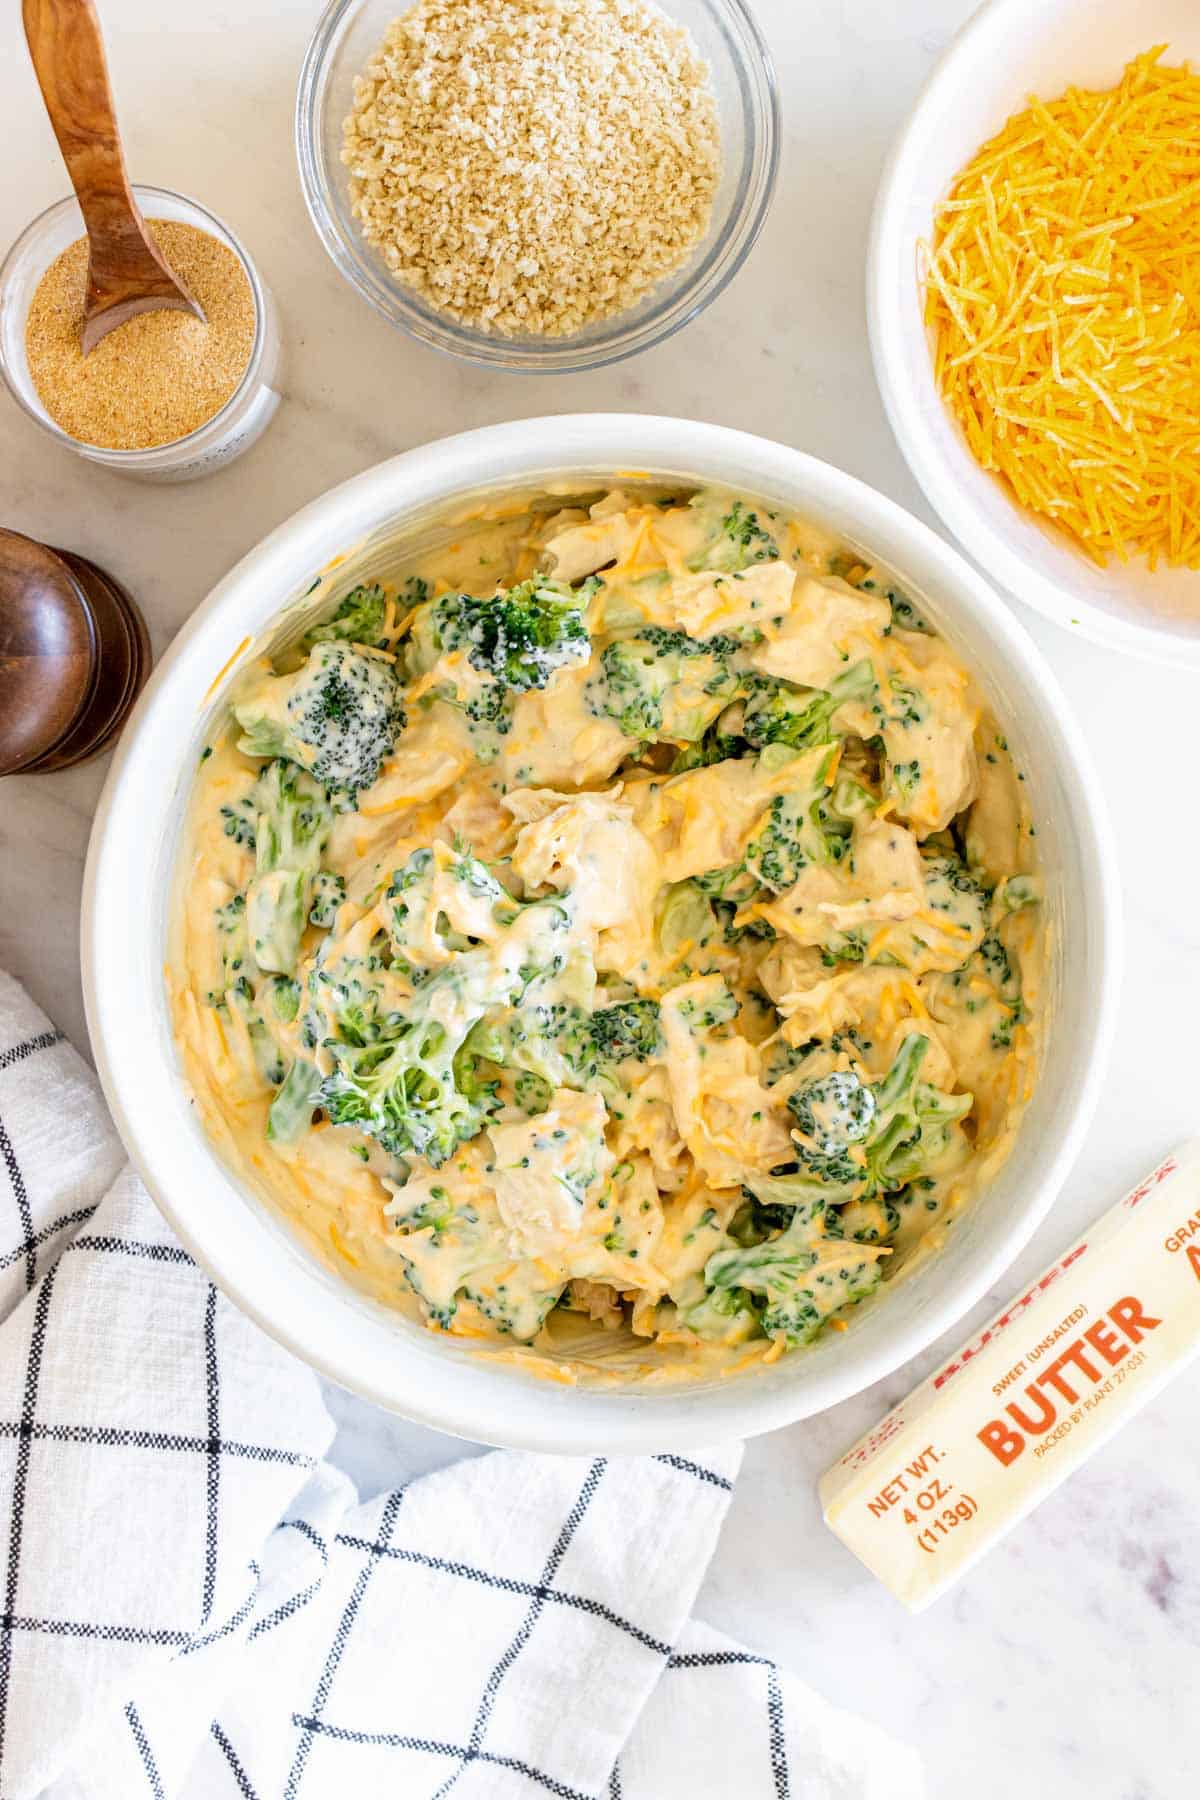 A bowl of broccoli dip with cheese and other ingredients.